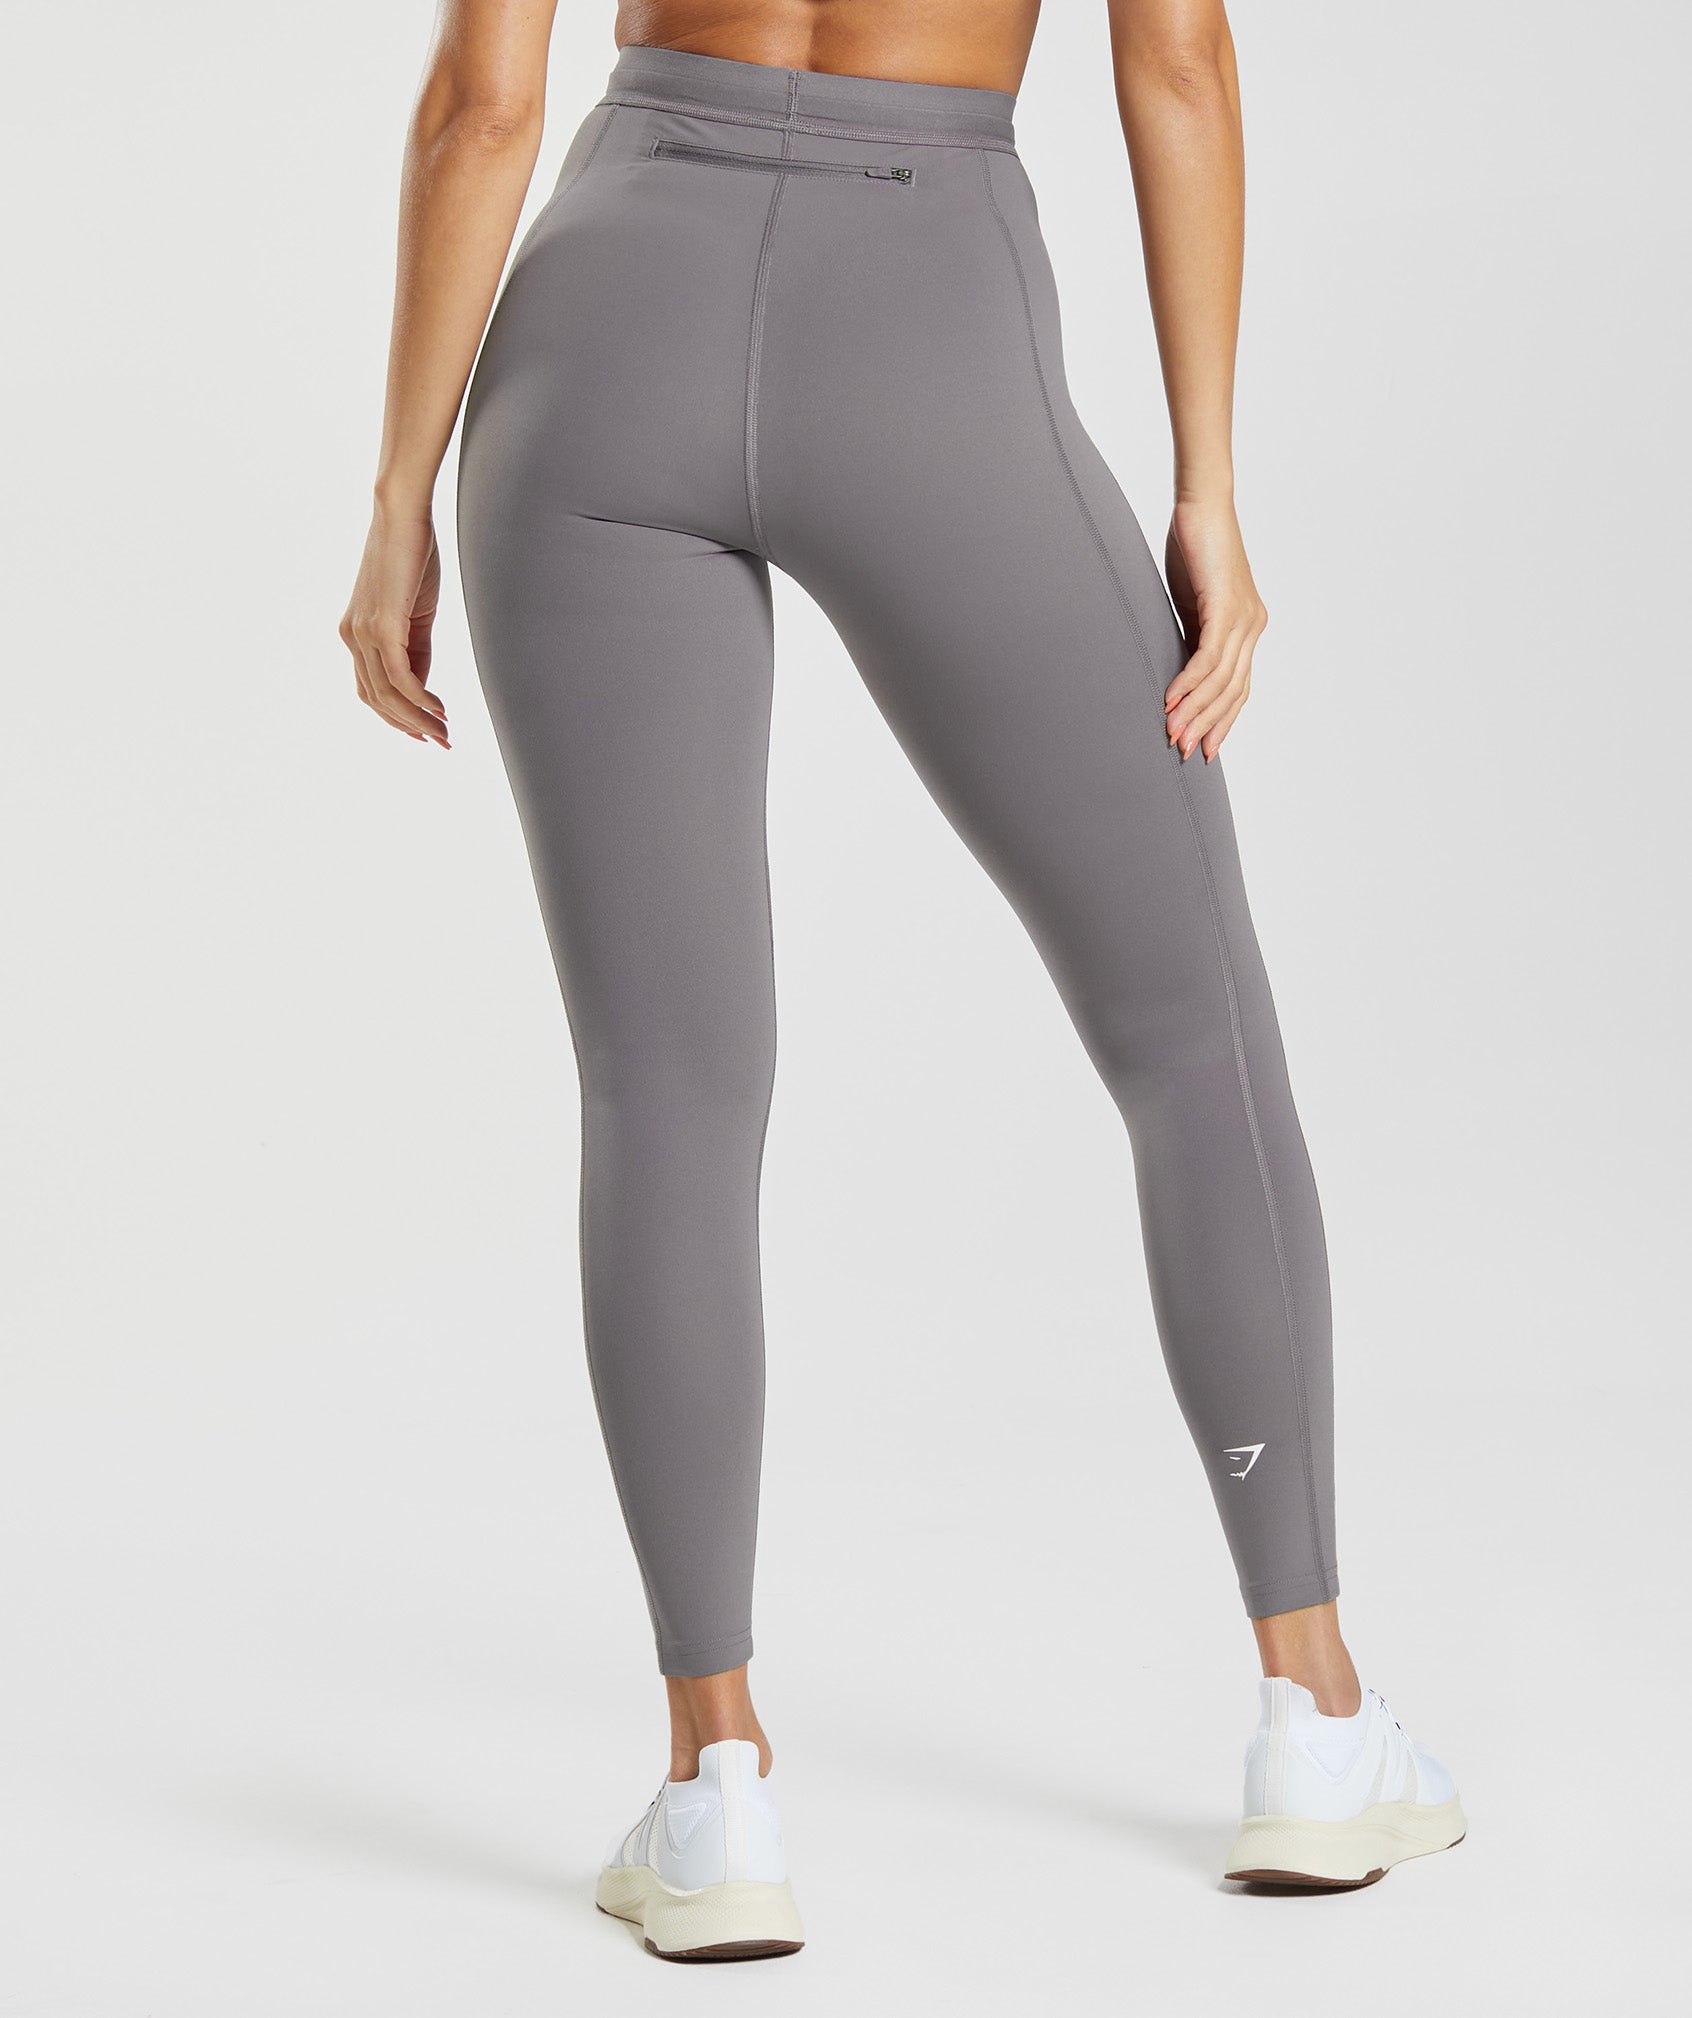 Balance Collection Gray Athletic Leggings for Women